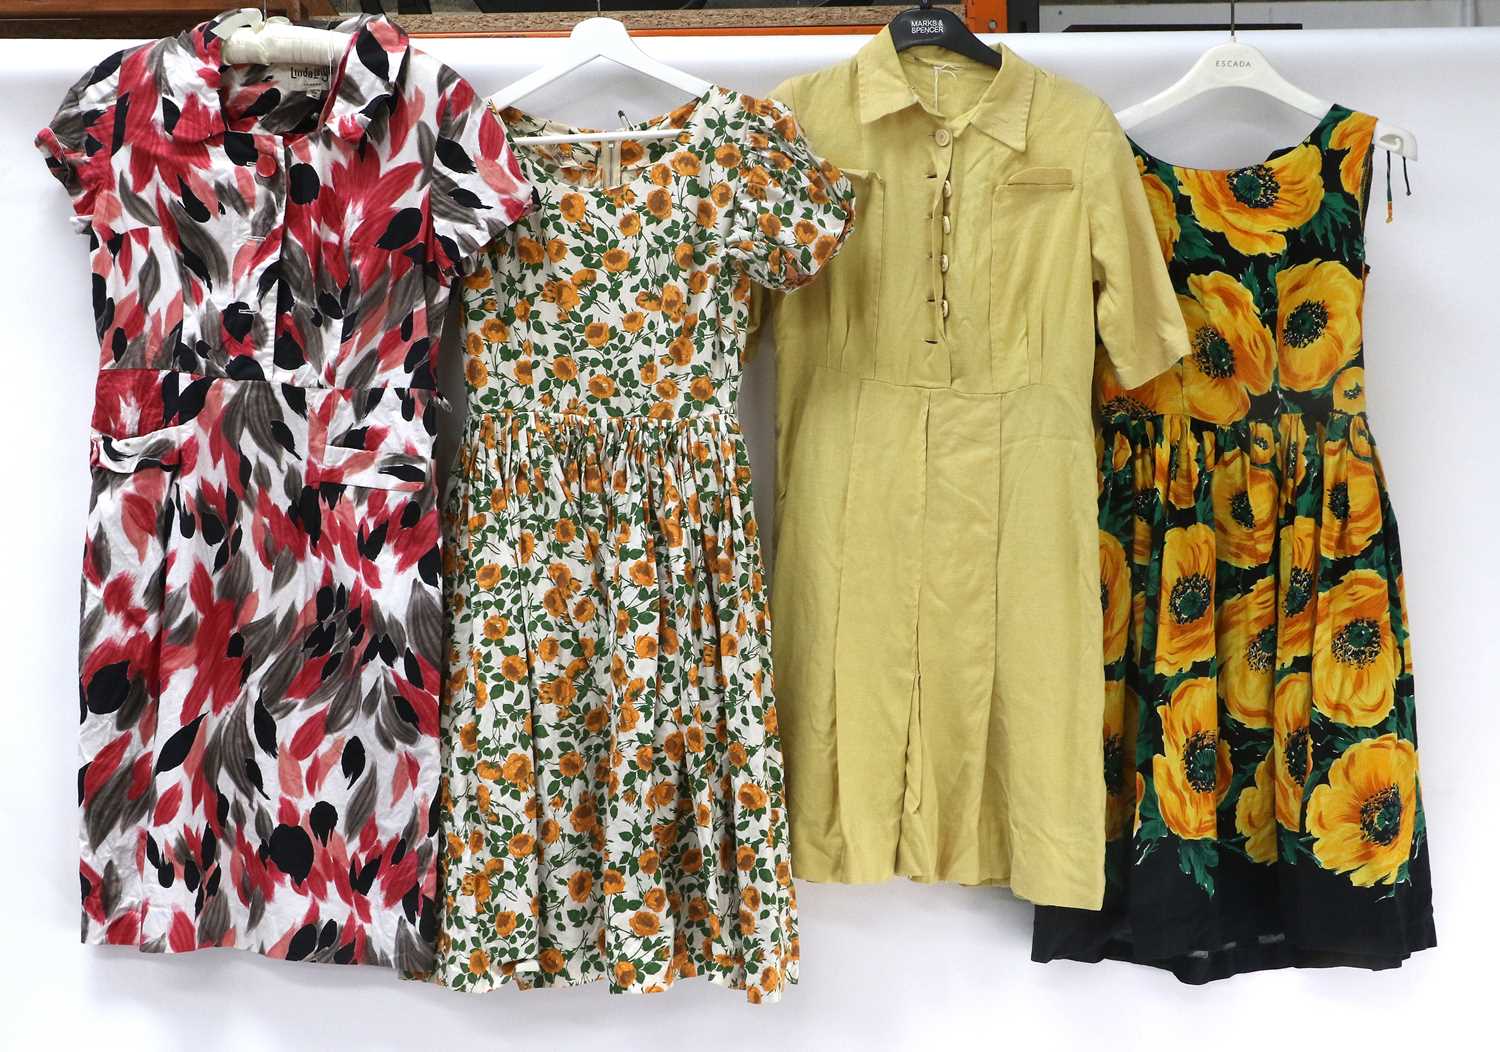 Circa 1950s and Later Printed Cotton Dresses, comprising California sleeveless dress printed with - Image 3 of 4